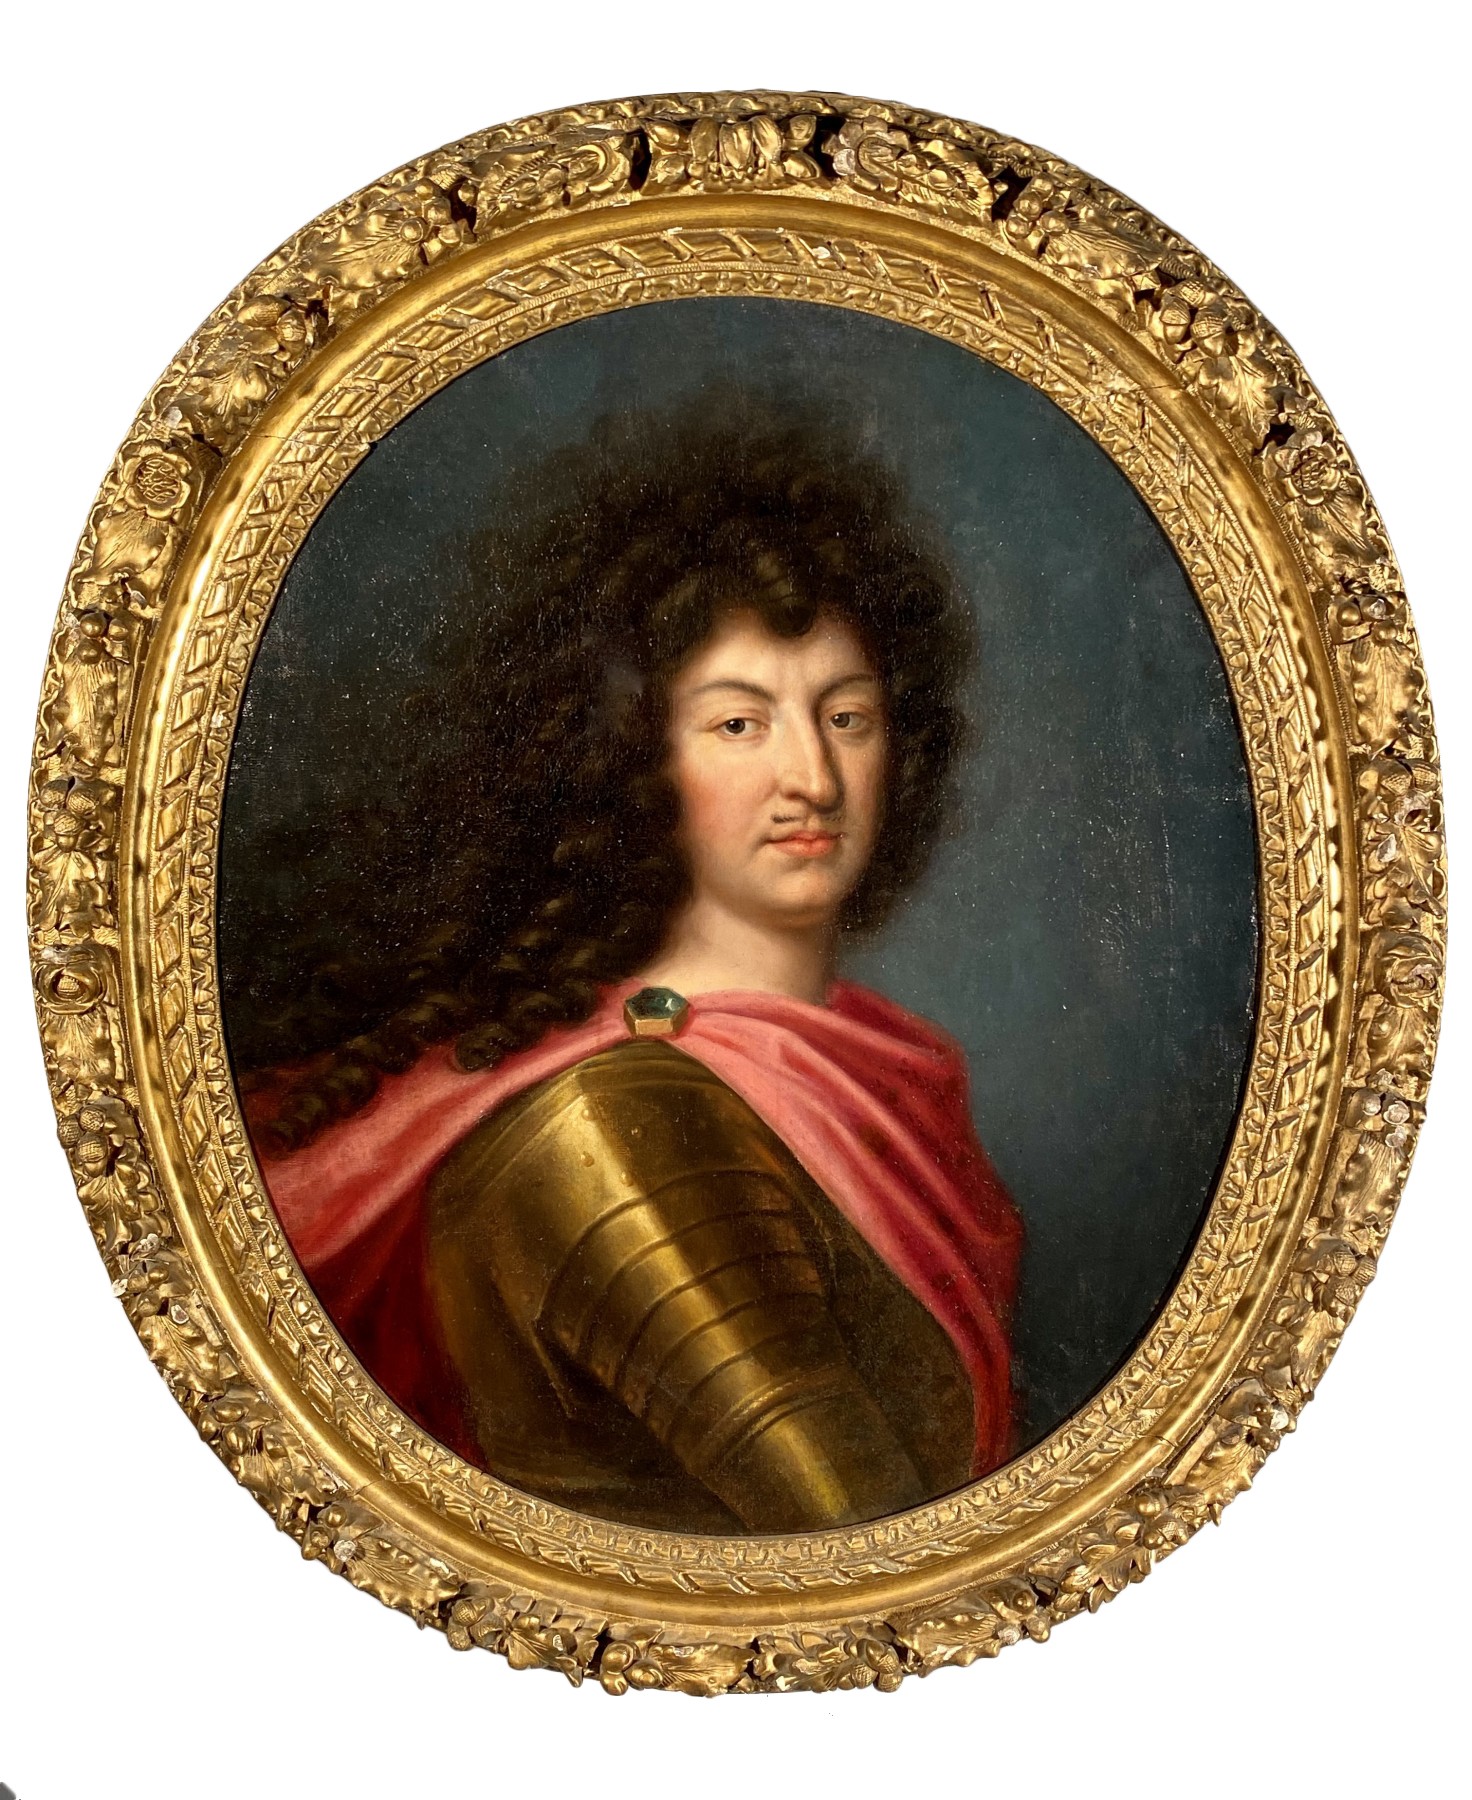 Portrait of King Louis XIV of France, 1670. The Sun King in